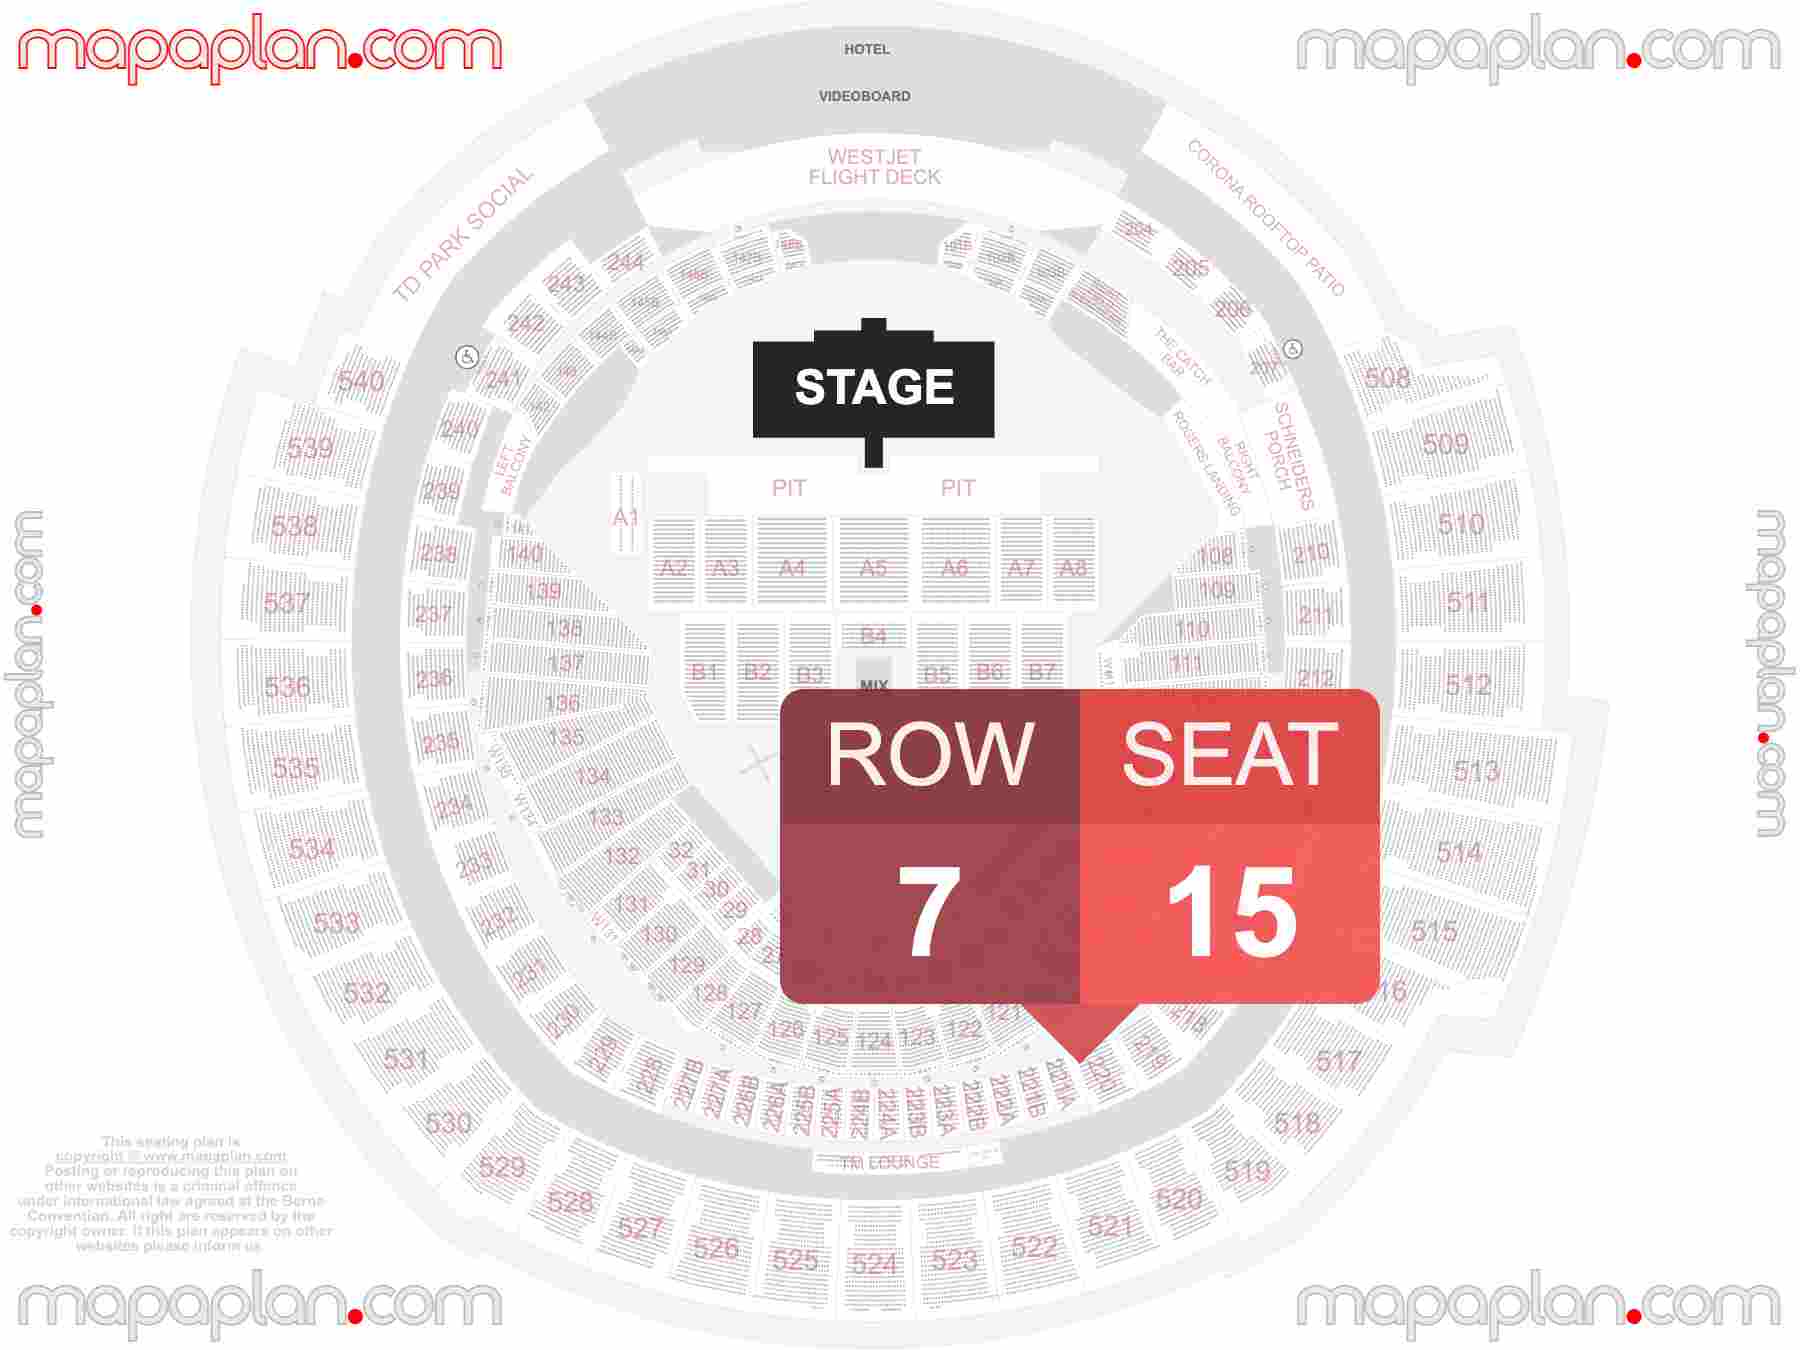 Toronto Rogers Centre seating map Concert detailed seat numbers and row numbering map with interactive map chart layout